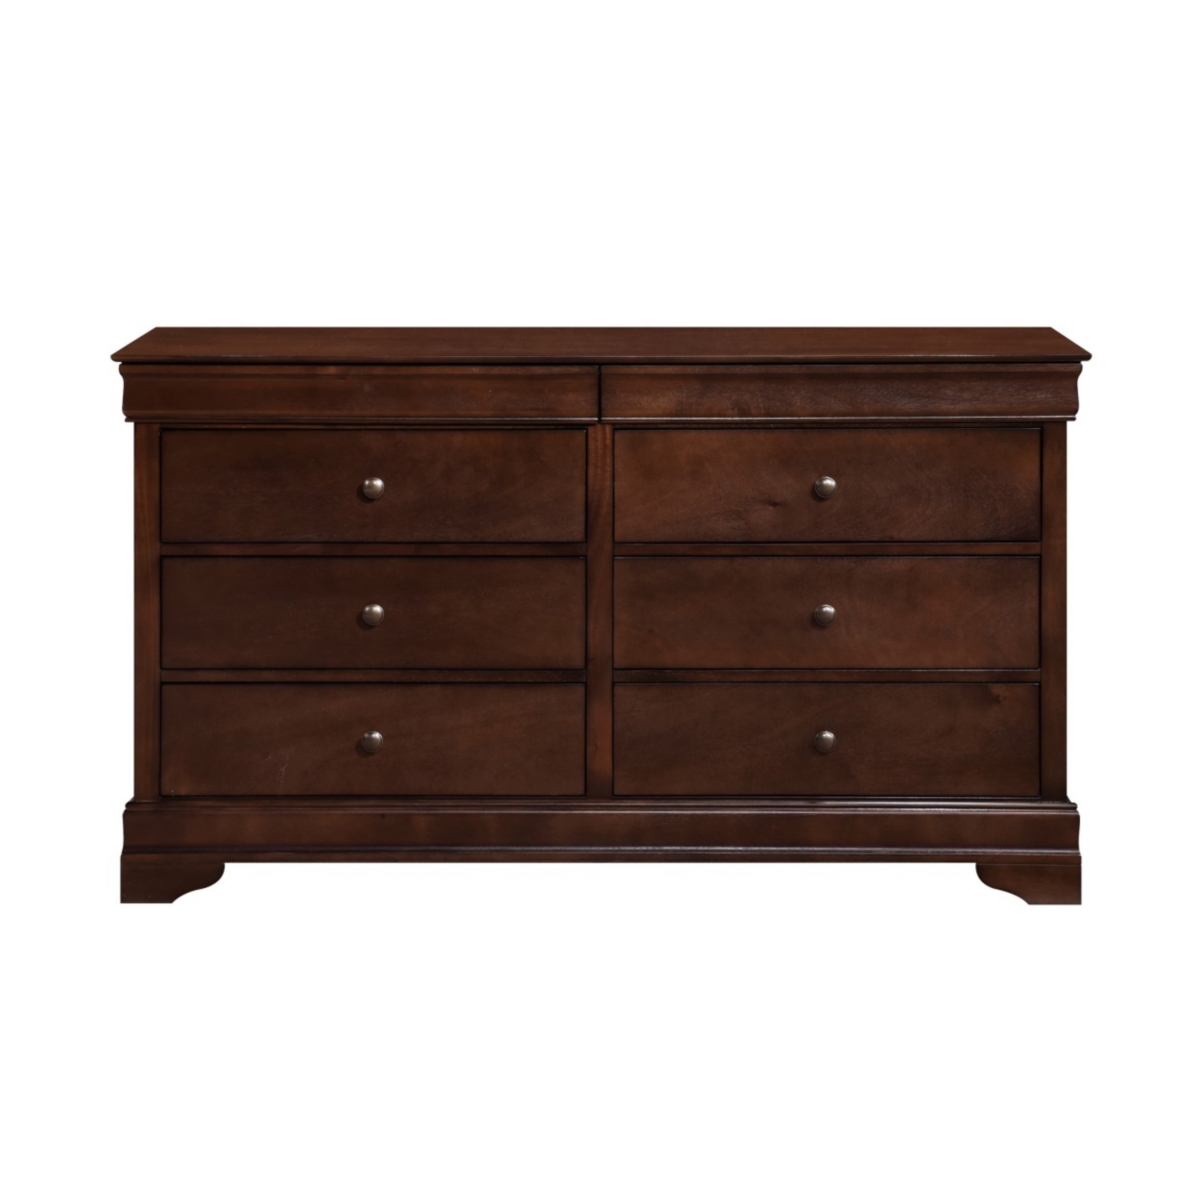 Rustic Louis Philippe Style 6-Drawer Dresser - Brown